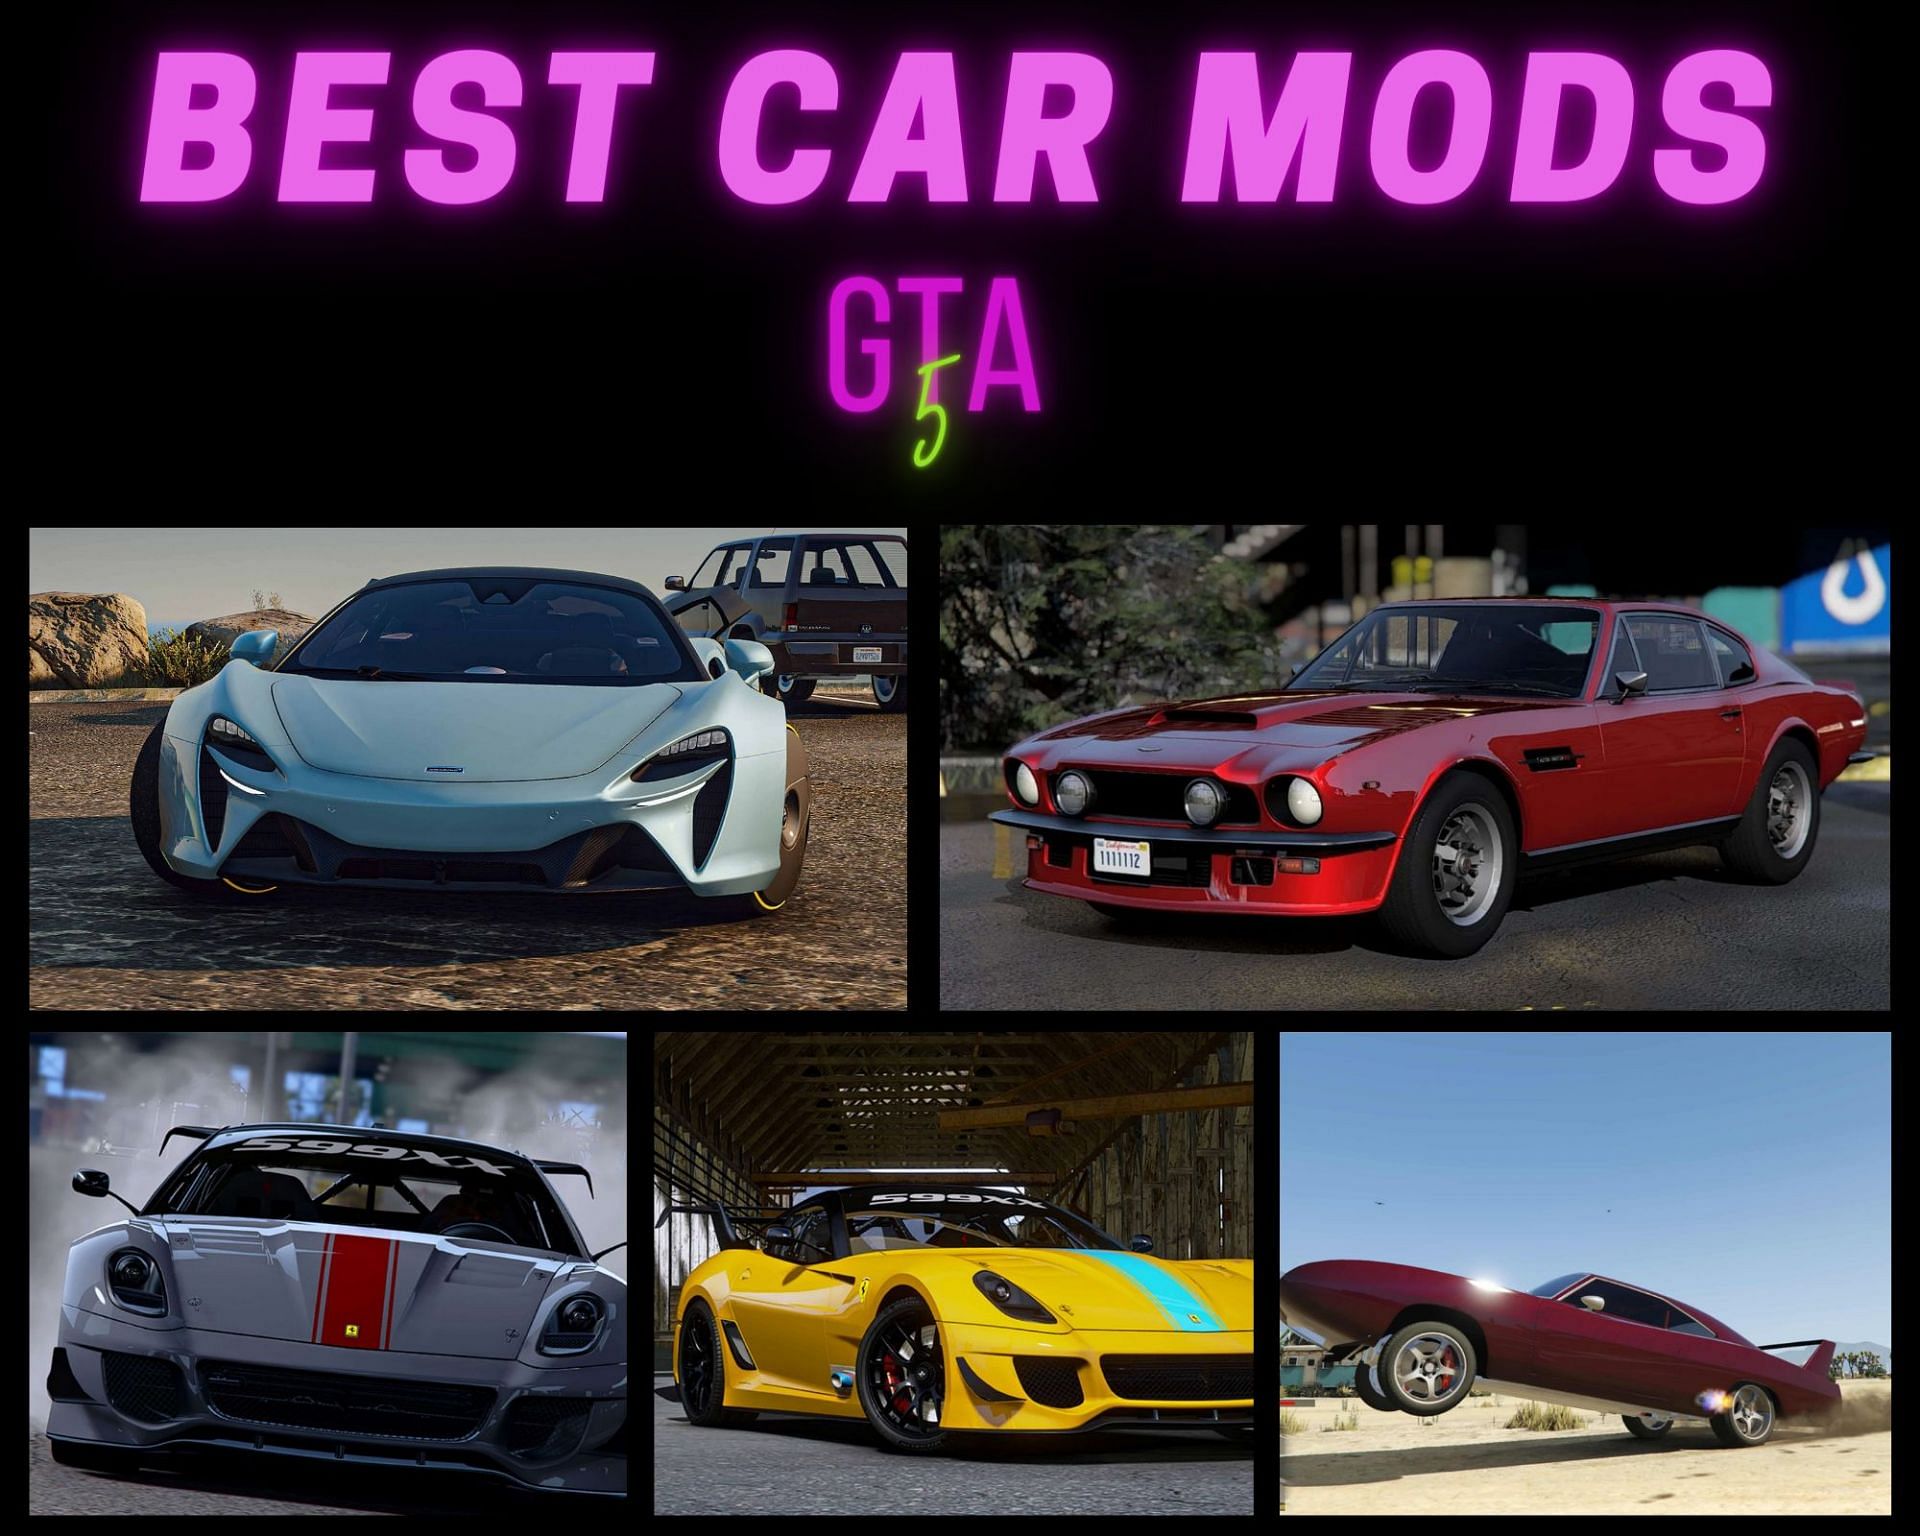 Real-life cars in GTA Online are fun